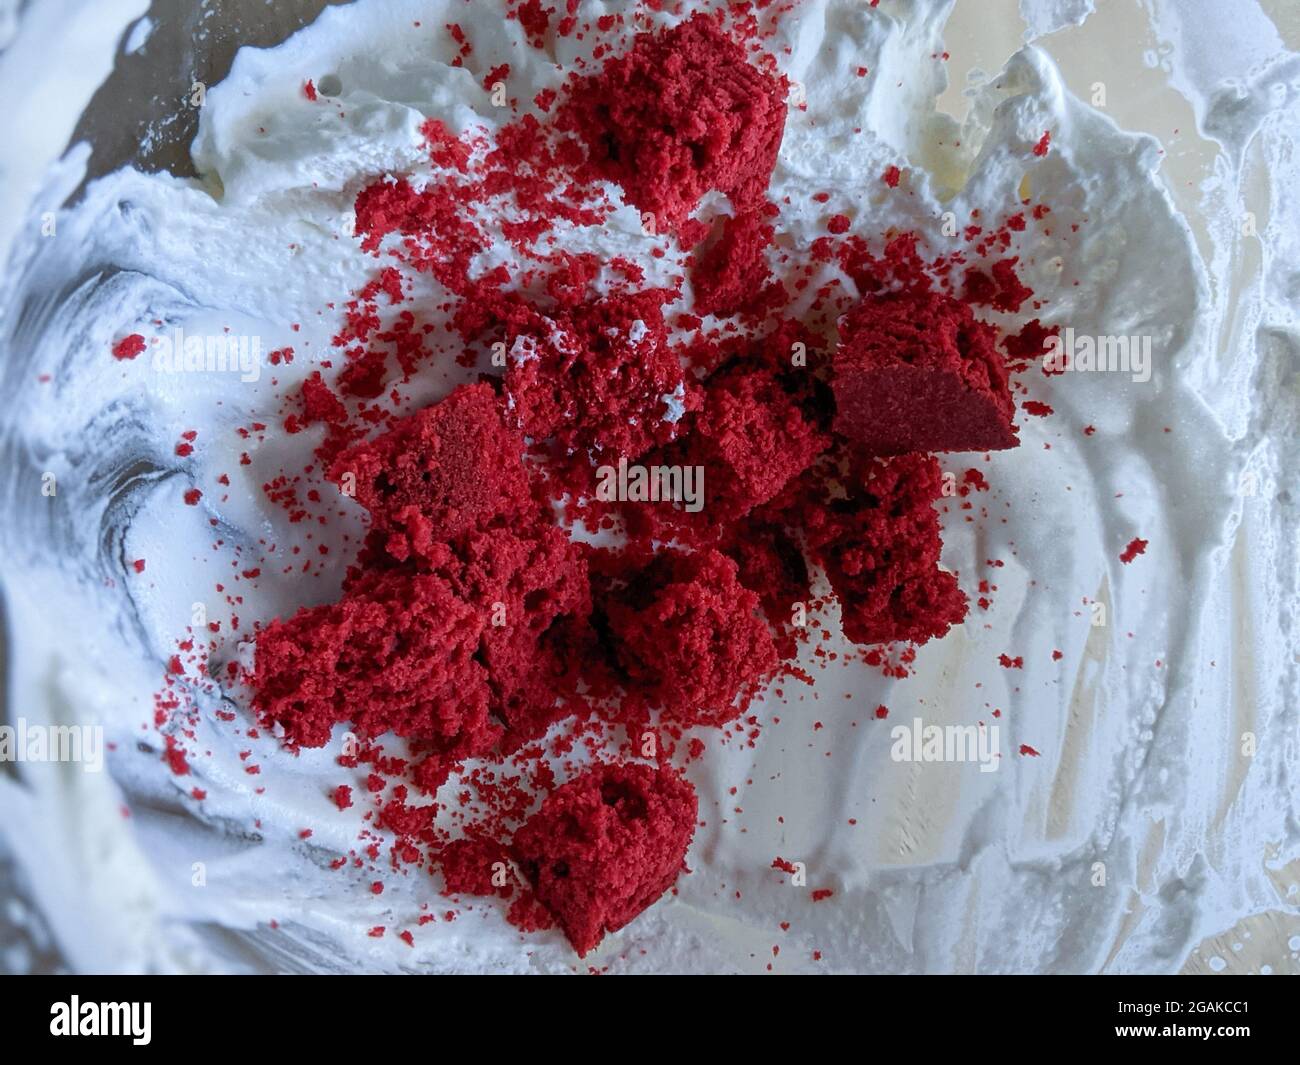 Red velvet cake and creamy frosty. Red velvet crumbs with frosting in a glass bowl. Stock Photo